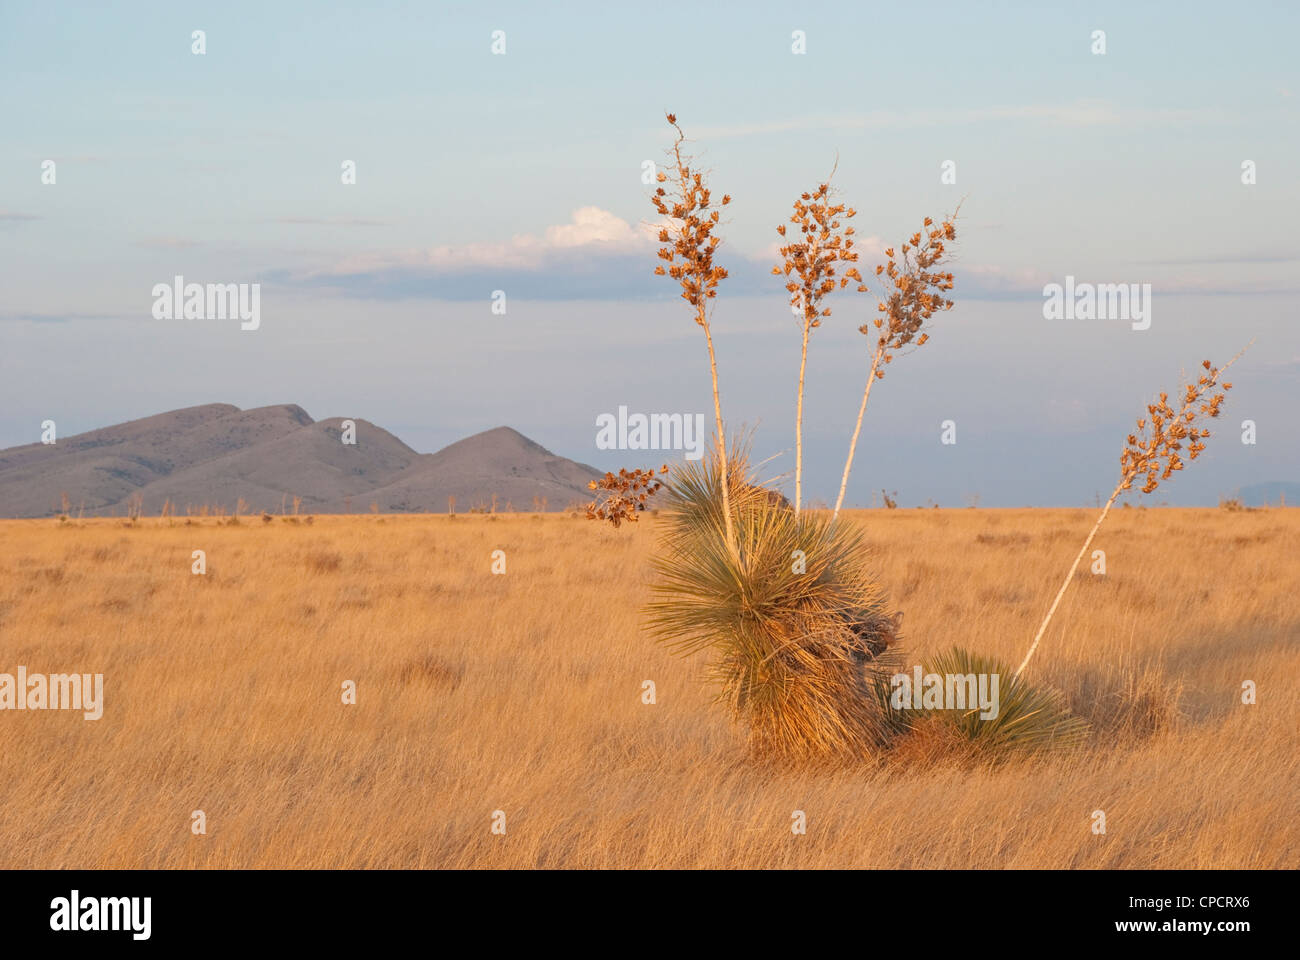 Dawn casts an orange light over the desert in southern New Mexico. Stock Photo